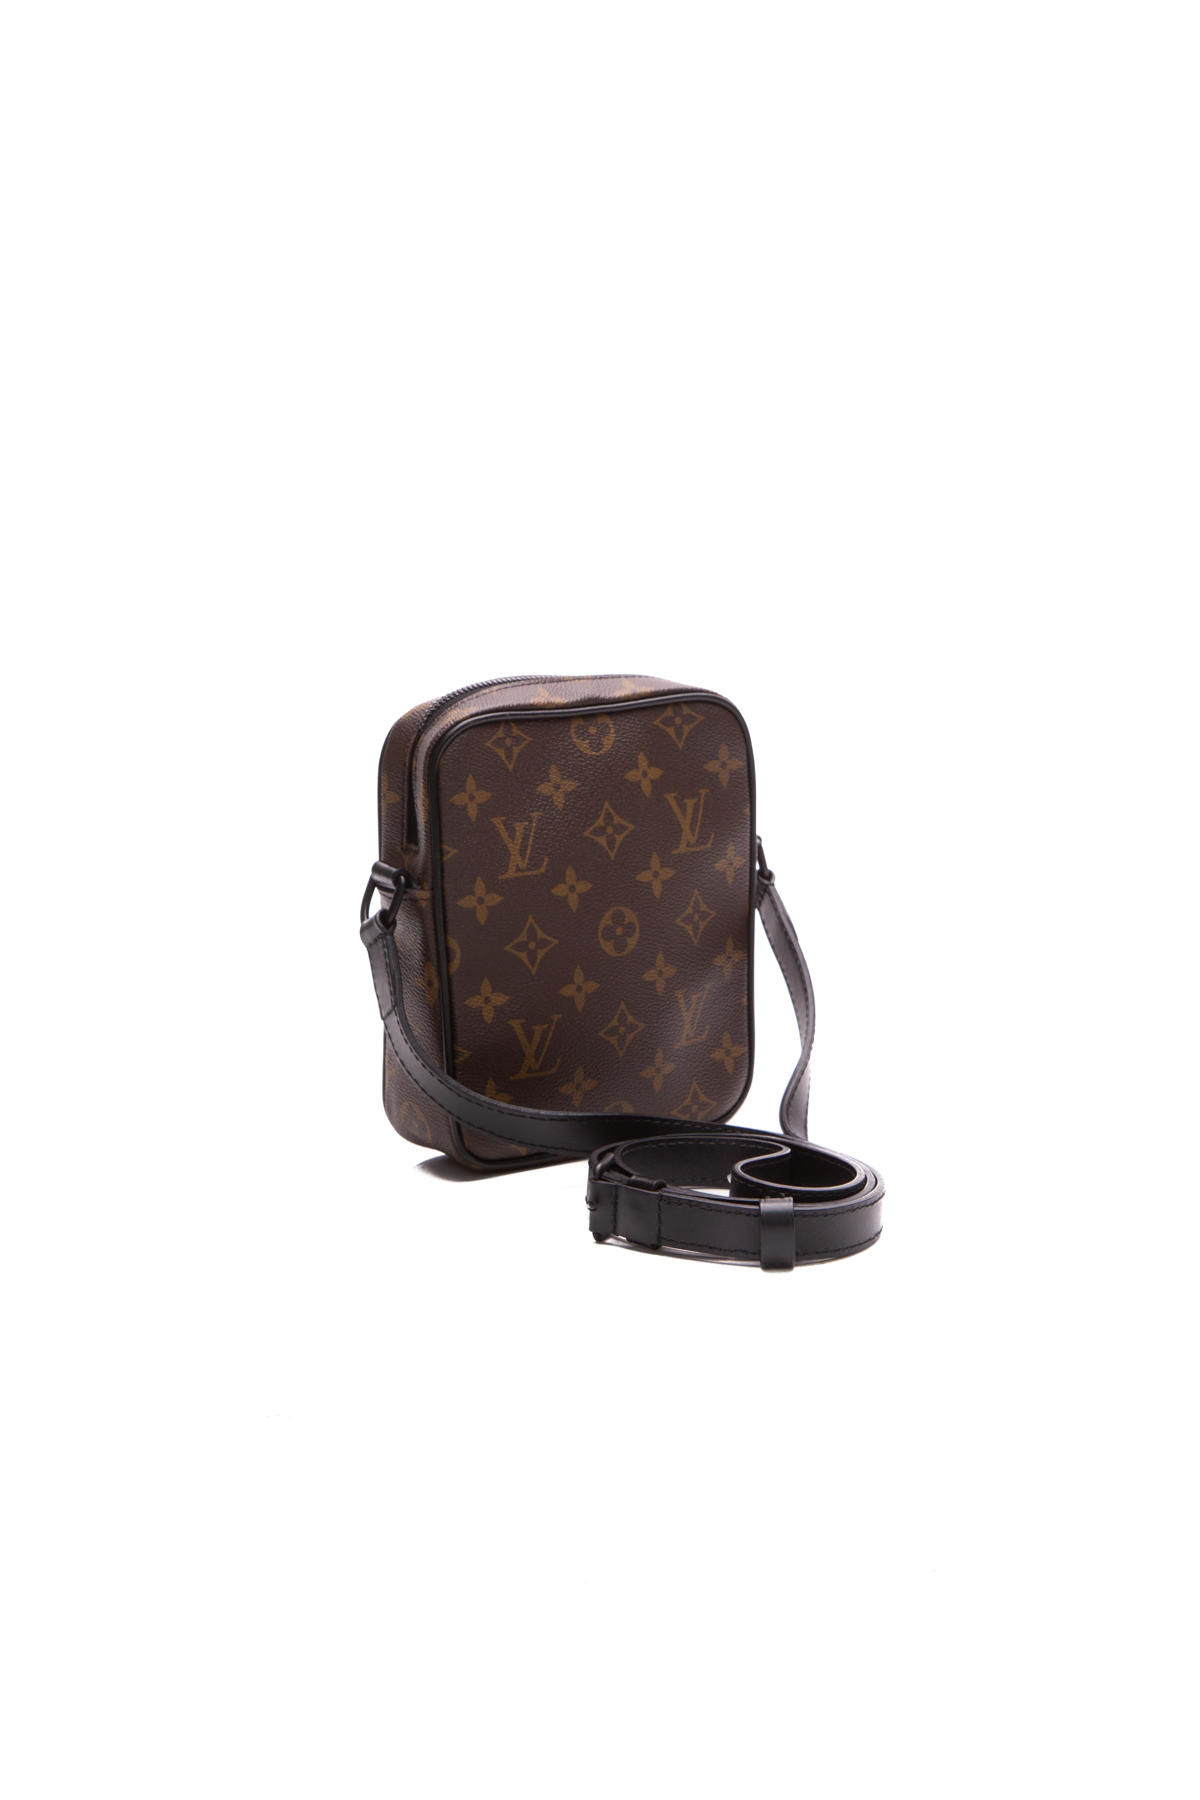 Woo Store - LOUIS VUITTON CHRISTOPHER WEARABLE THANK YOU